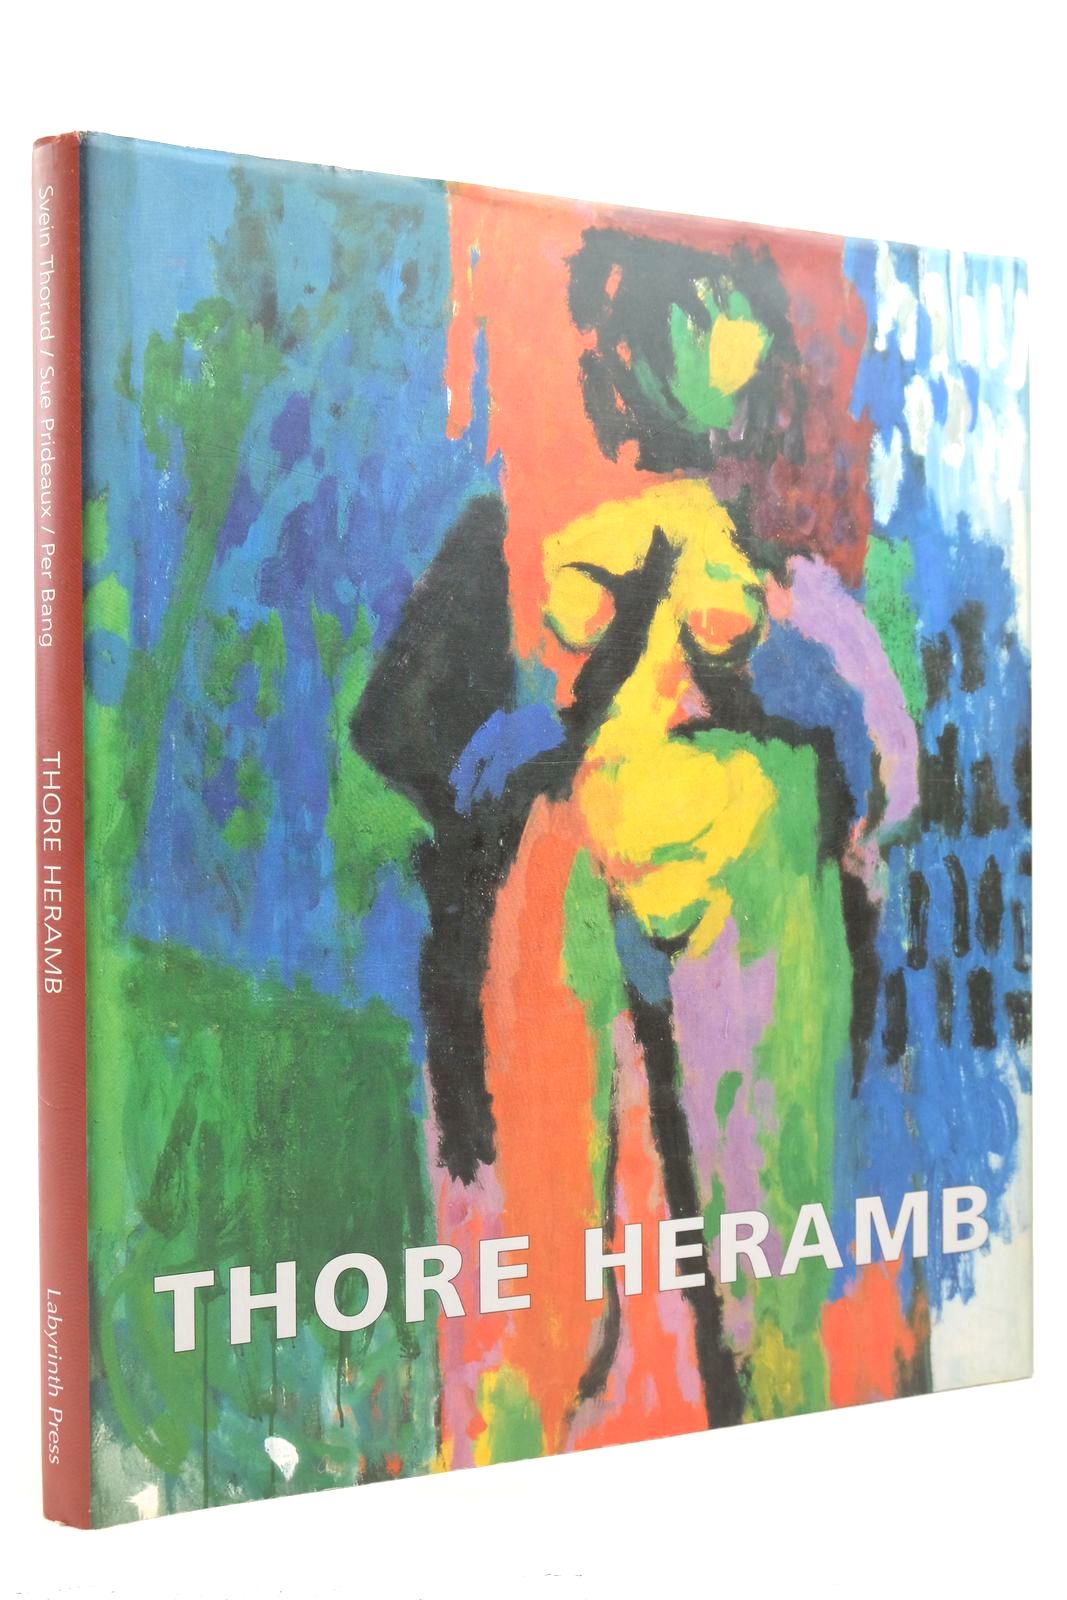 Photo of THORE HERAMB written by Thorud, Svein Prideaux, Sue Bang, Per illustrated by Heramb, Thore published by Labyrinth Press (STOCK CODE: 2140815)  for sale by Stella & Rose's Books